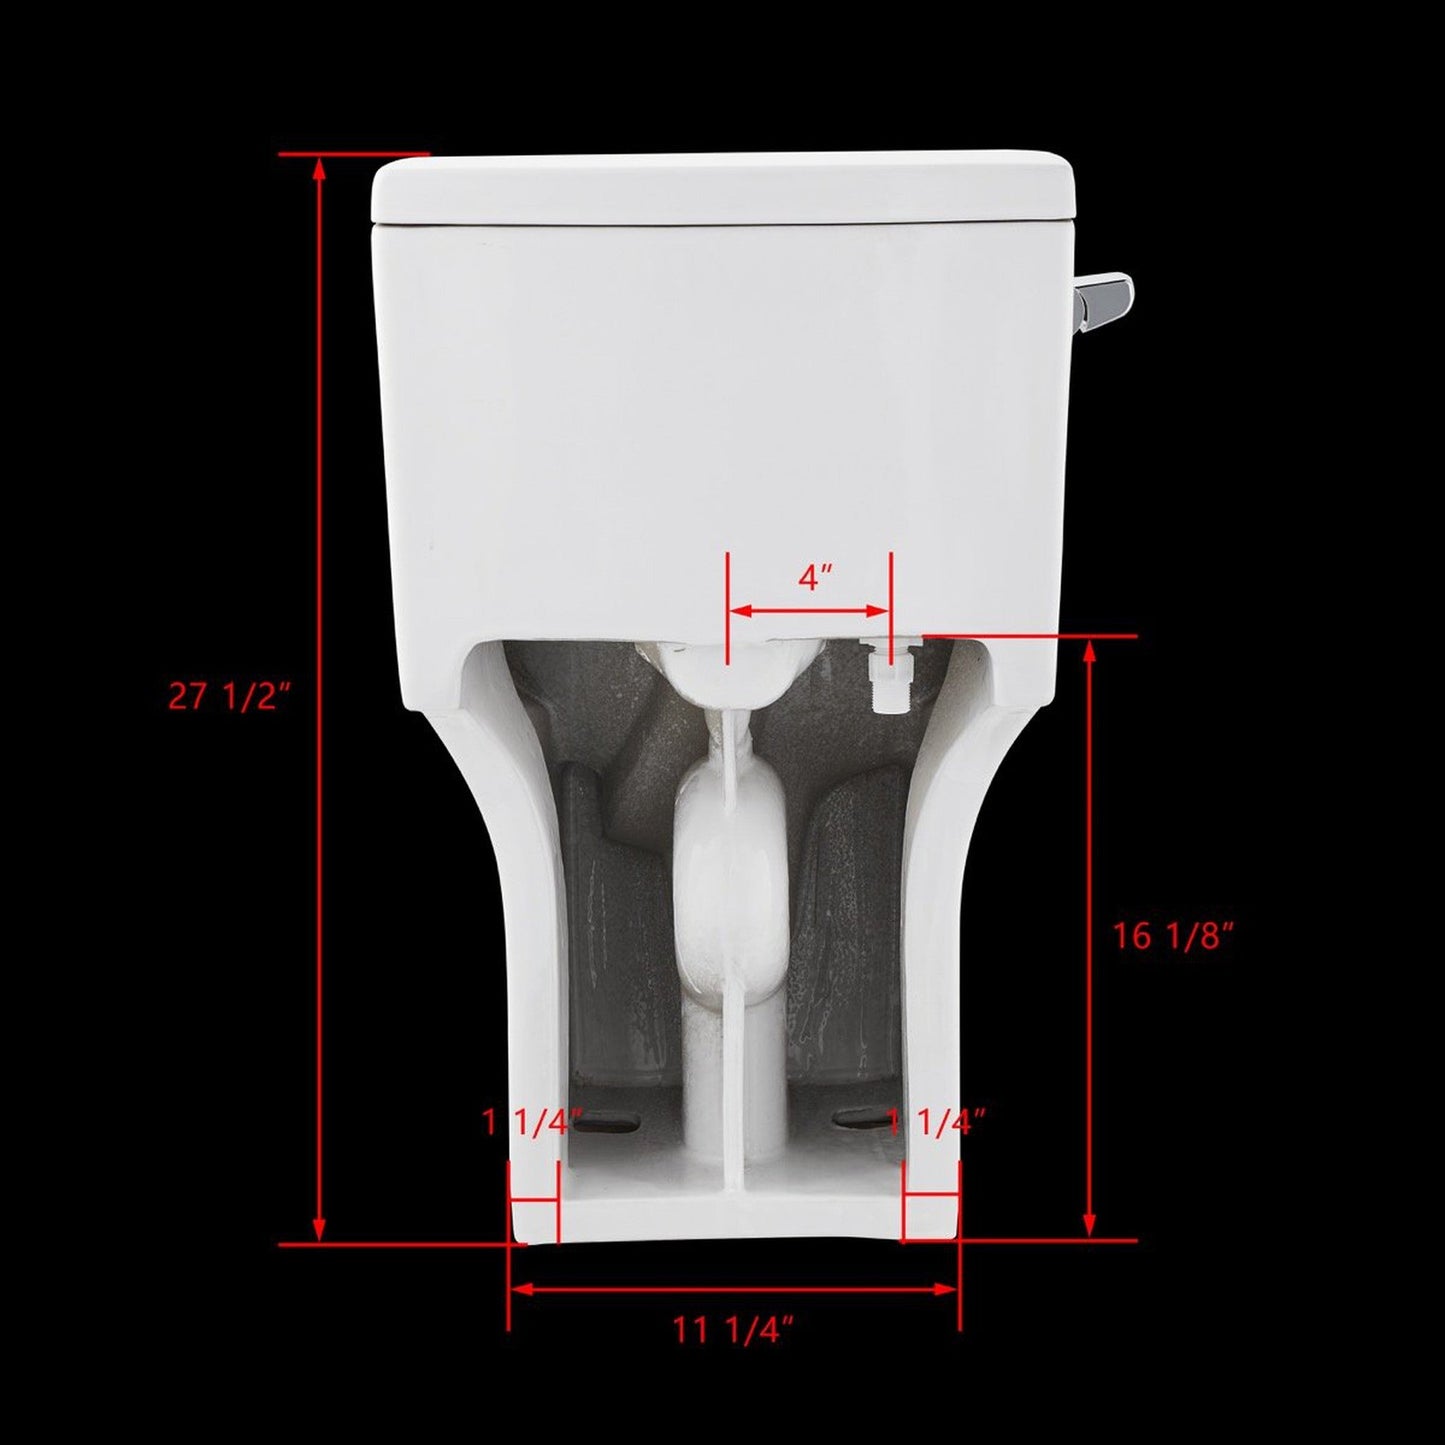 DeerValley Concord 1.28 GPF Single-Flush Elongated White One-Piece Toilet With Soft Closing Seat